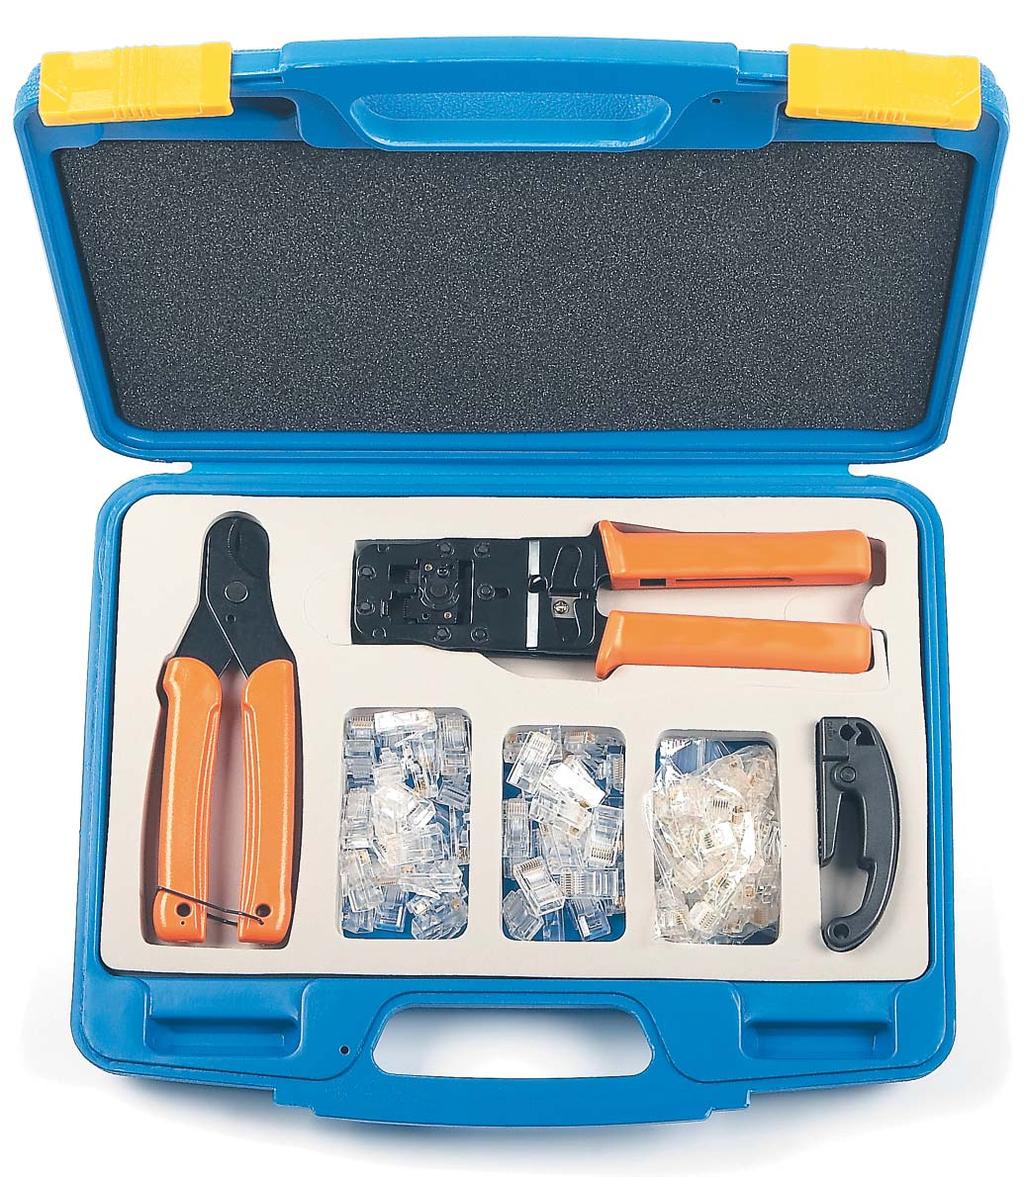 206 HYPERLINE Tool Kits Tool Kit HL-NTK100 Crimping tool for RJ-45, RJ-12 Cable stripper Cable cutters Modular plugs 8P8C 50 pcs. Modular plugs 6P6C 50 pcs.